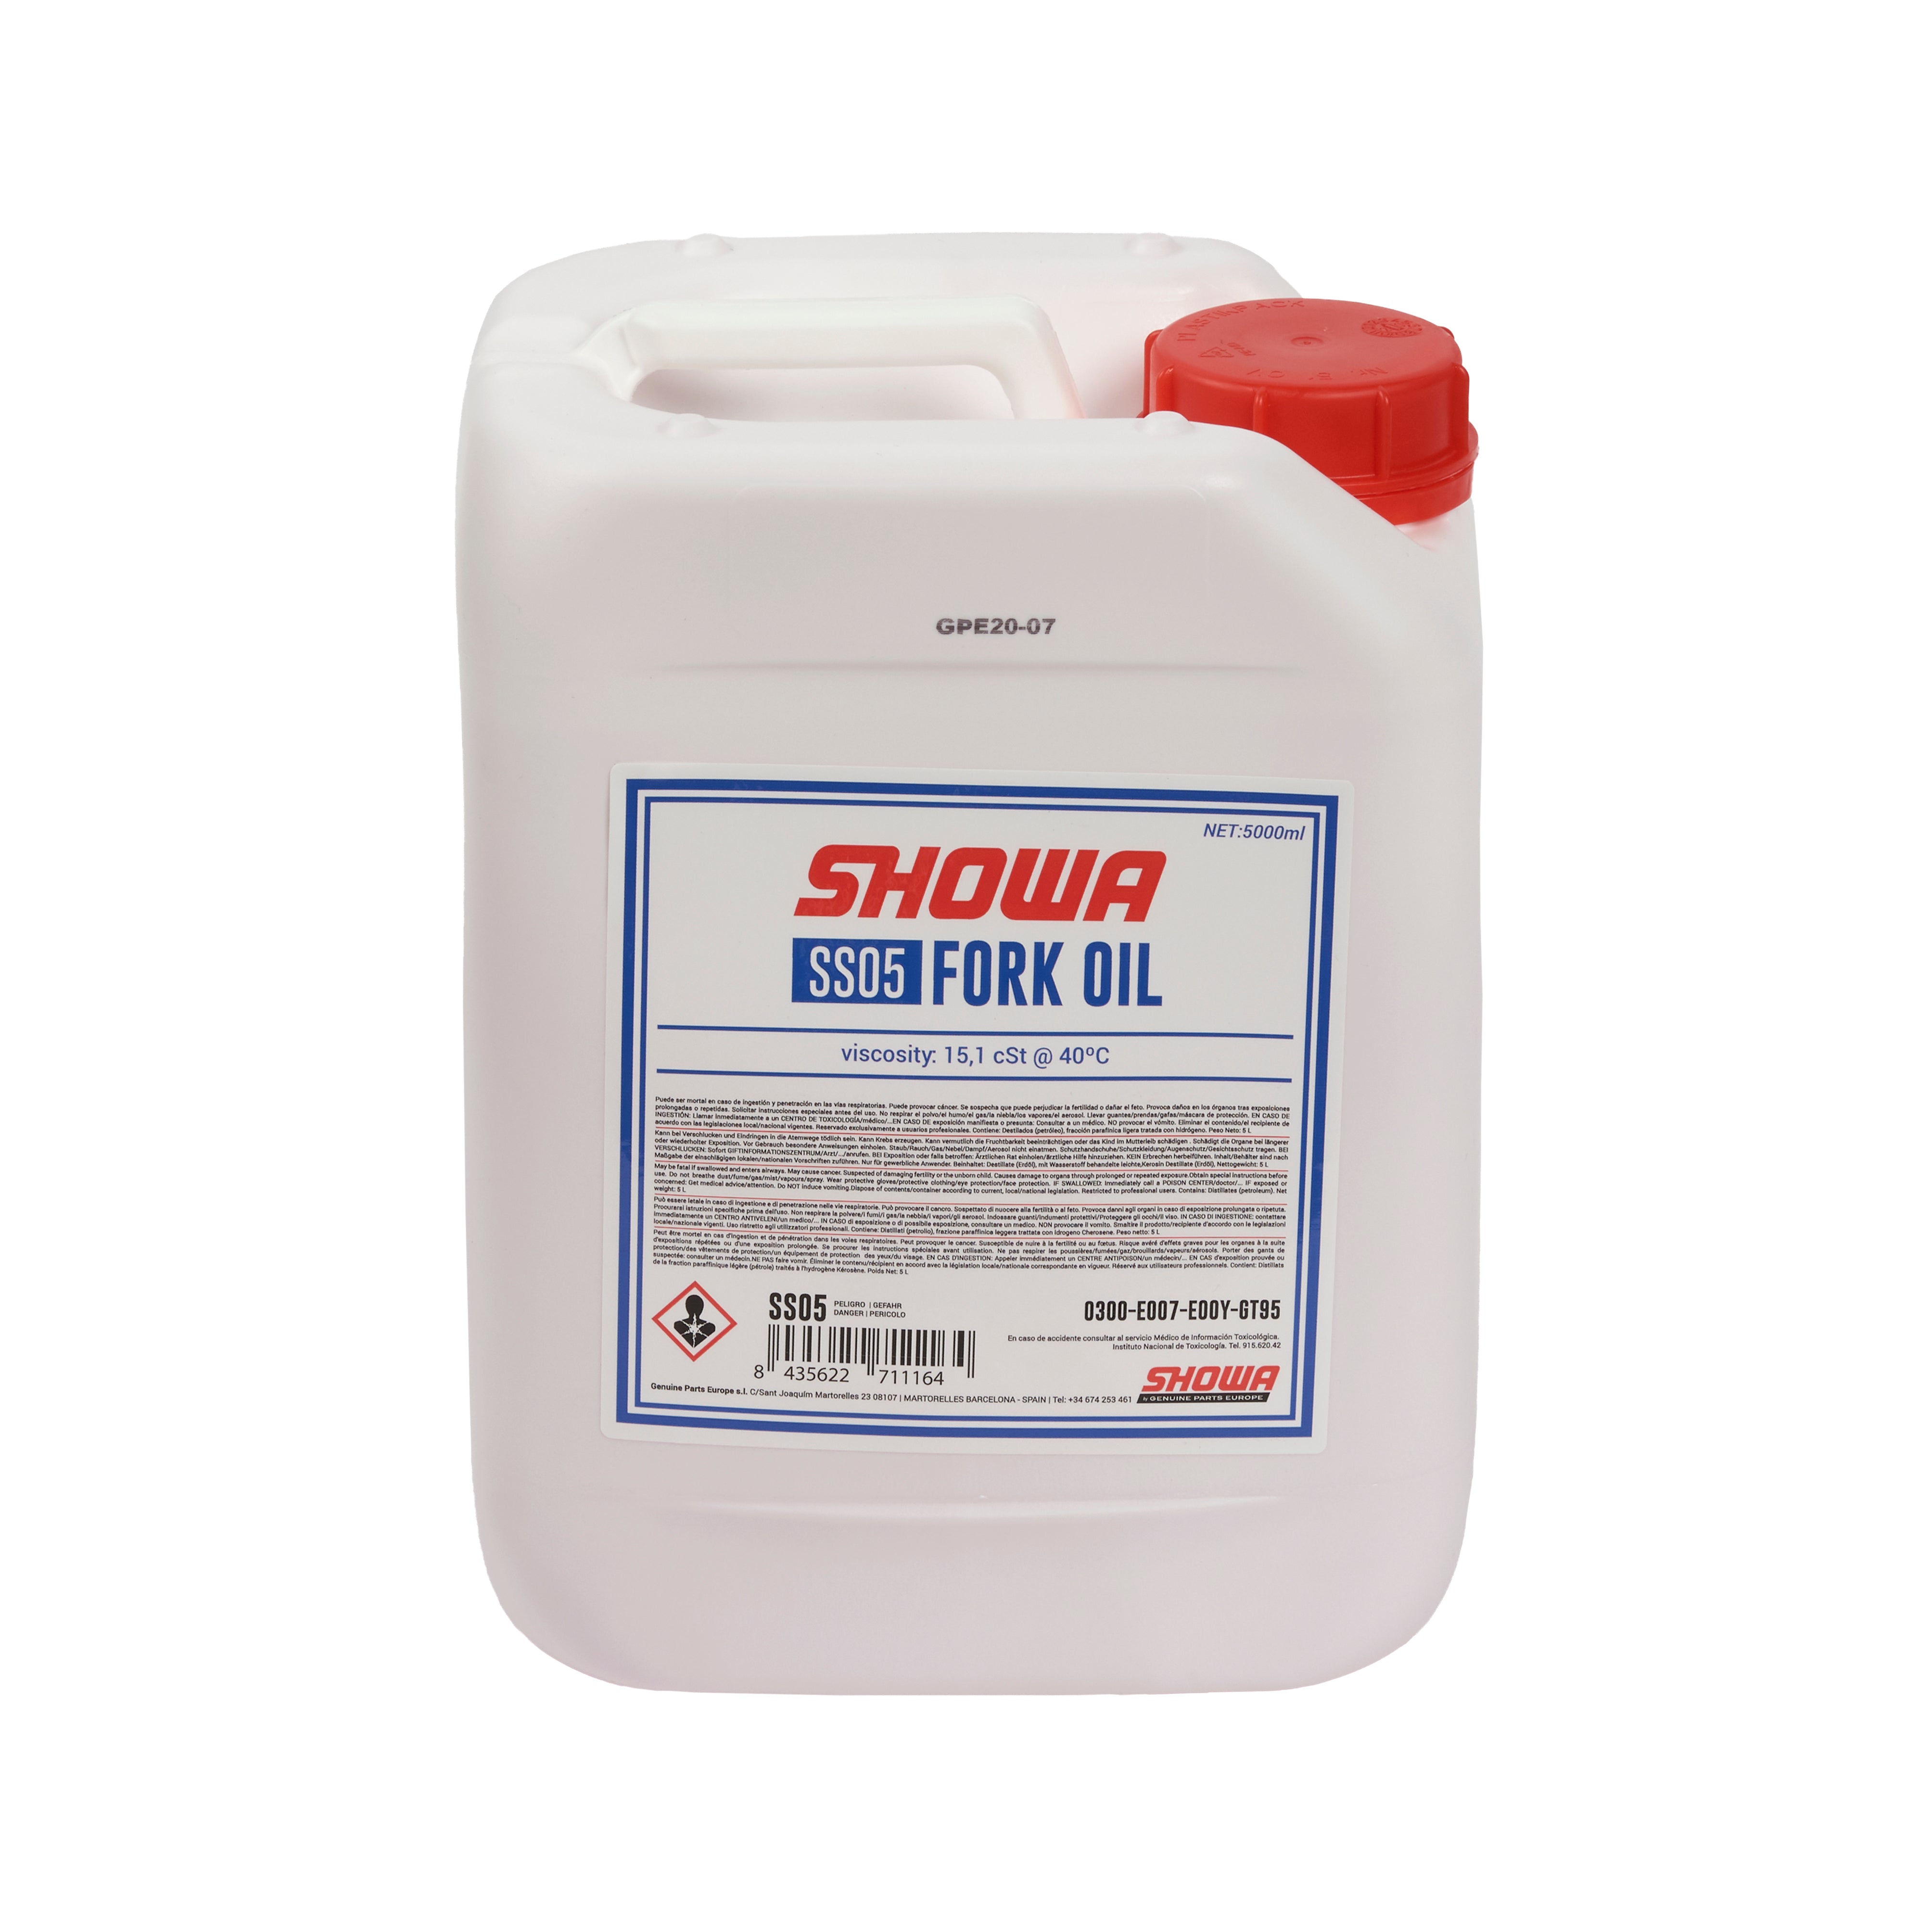 SHOWA FF OIL SS05 (15,1 CST at 40¼C) 5 LITER